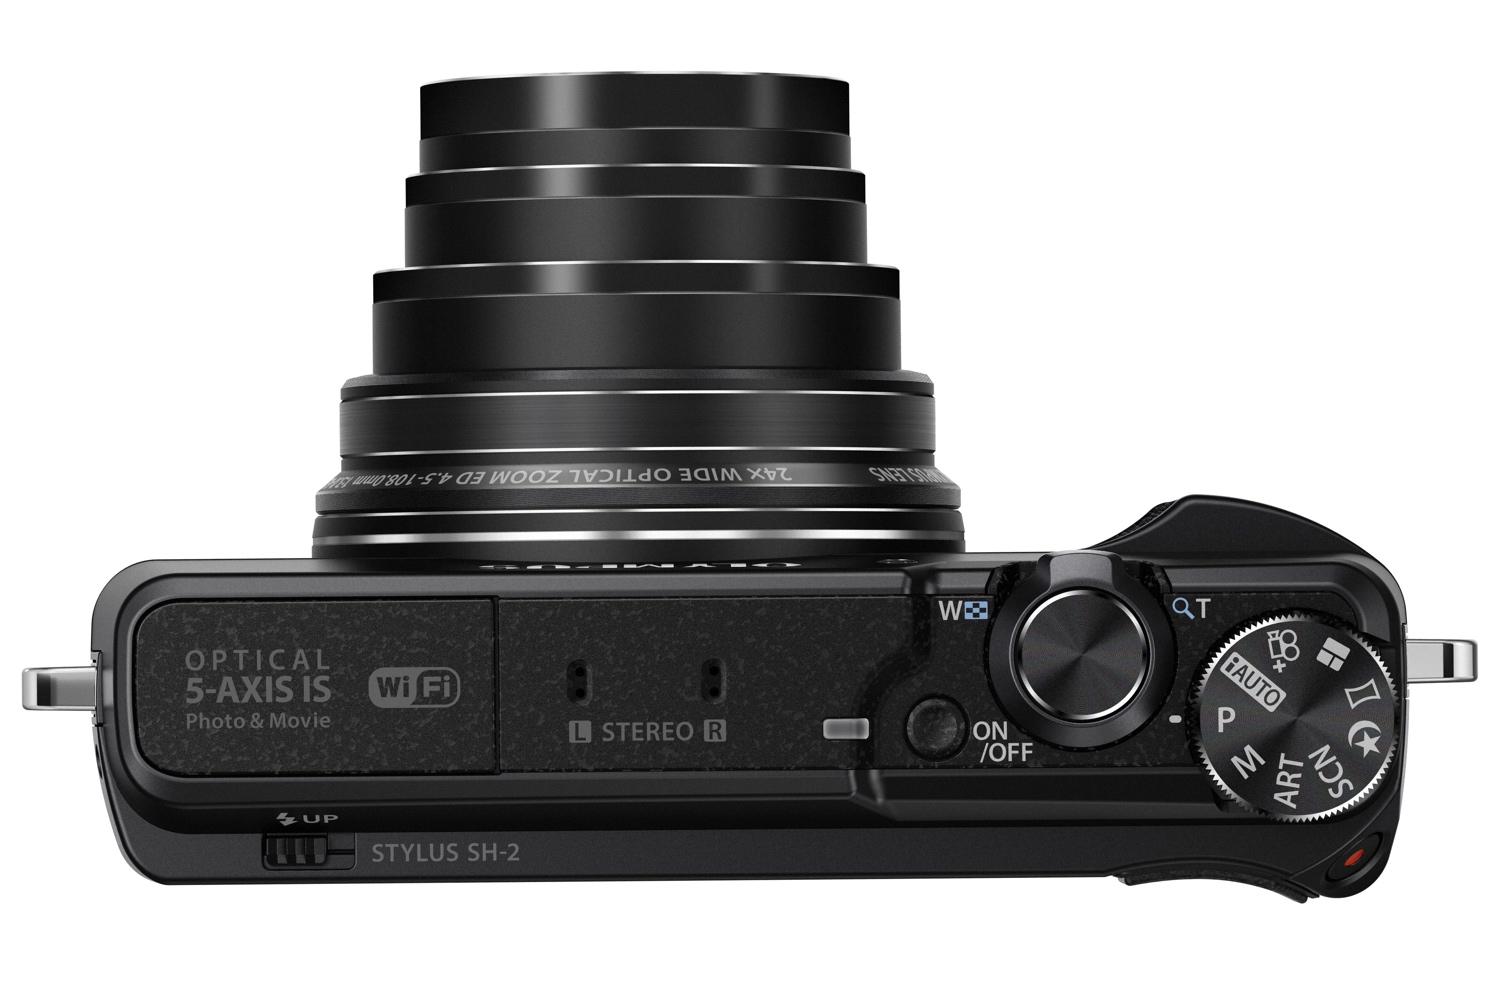 olympus stylus sh 2 compact camera retains 5 axis stabilization adds new night modes sh2 9